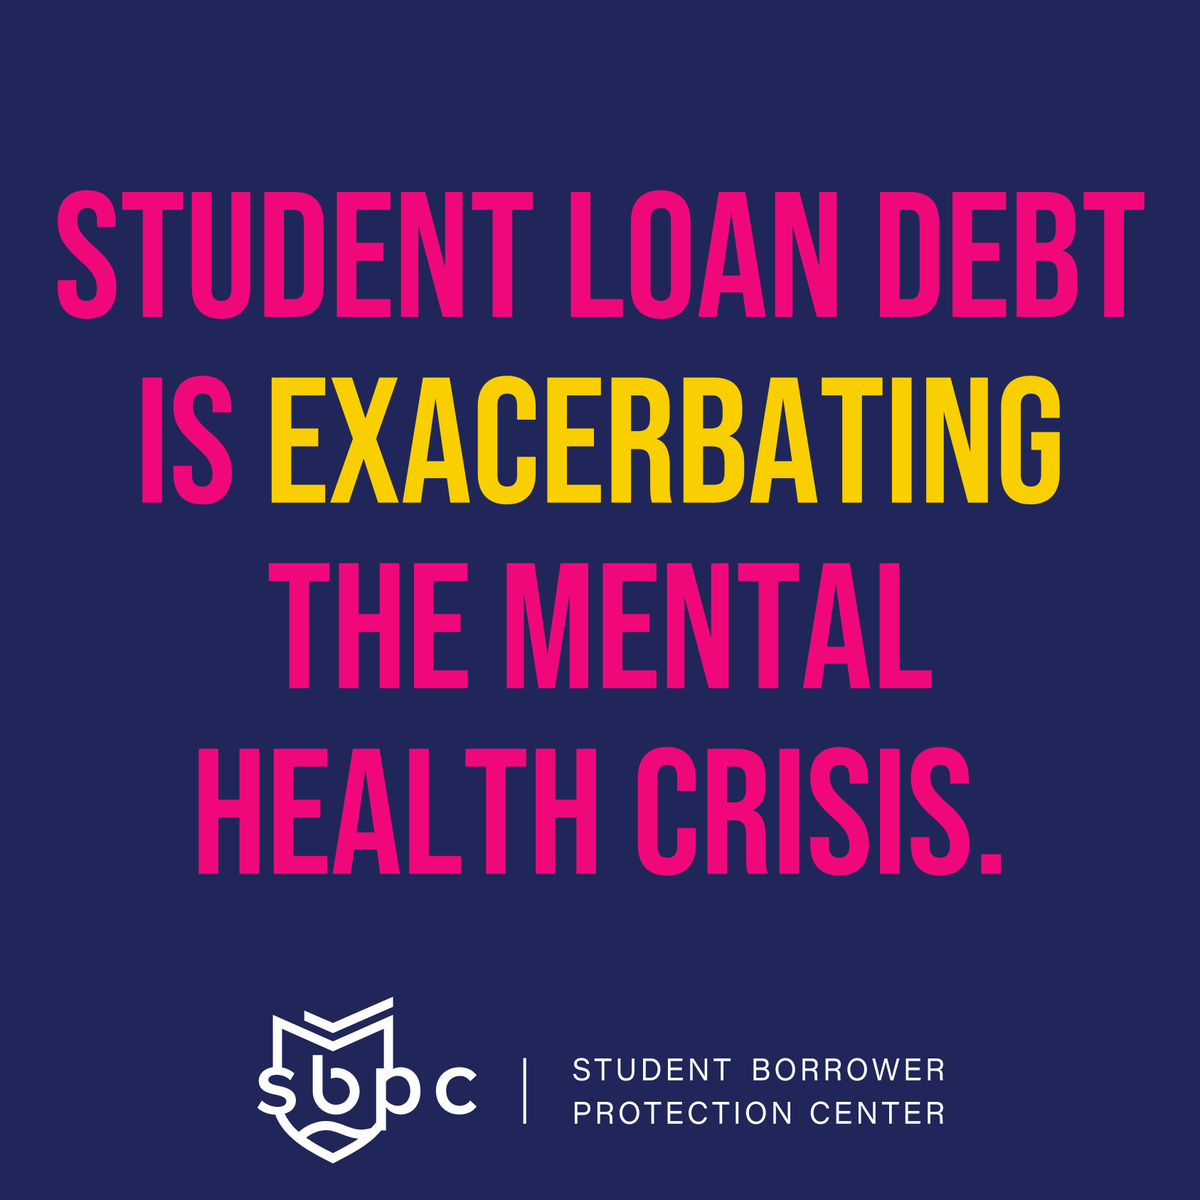 Similar to other forms of financial insecurity, student loan debt has been found to negatively impact borrowers’ mental and physical health—increasing rates of anxiety and depression.